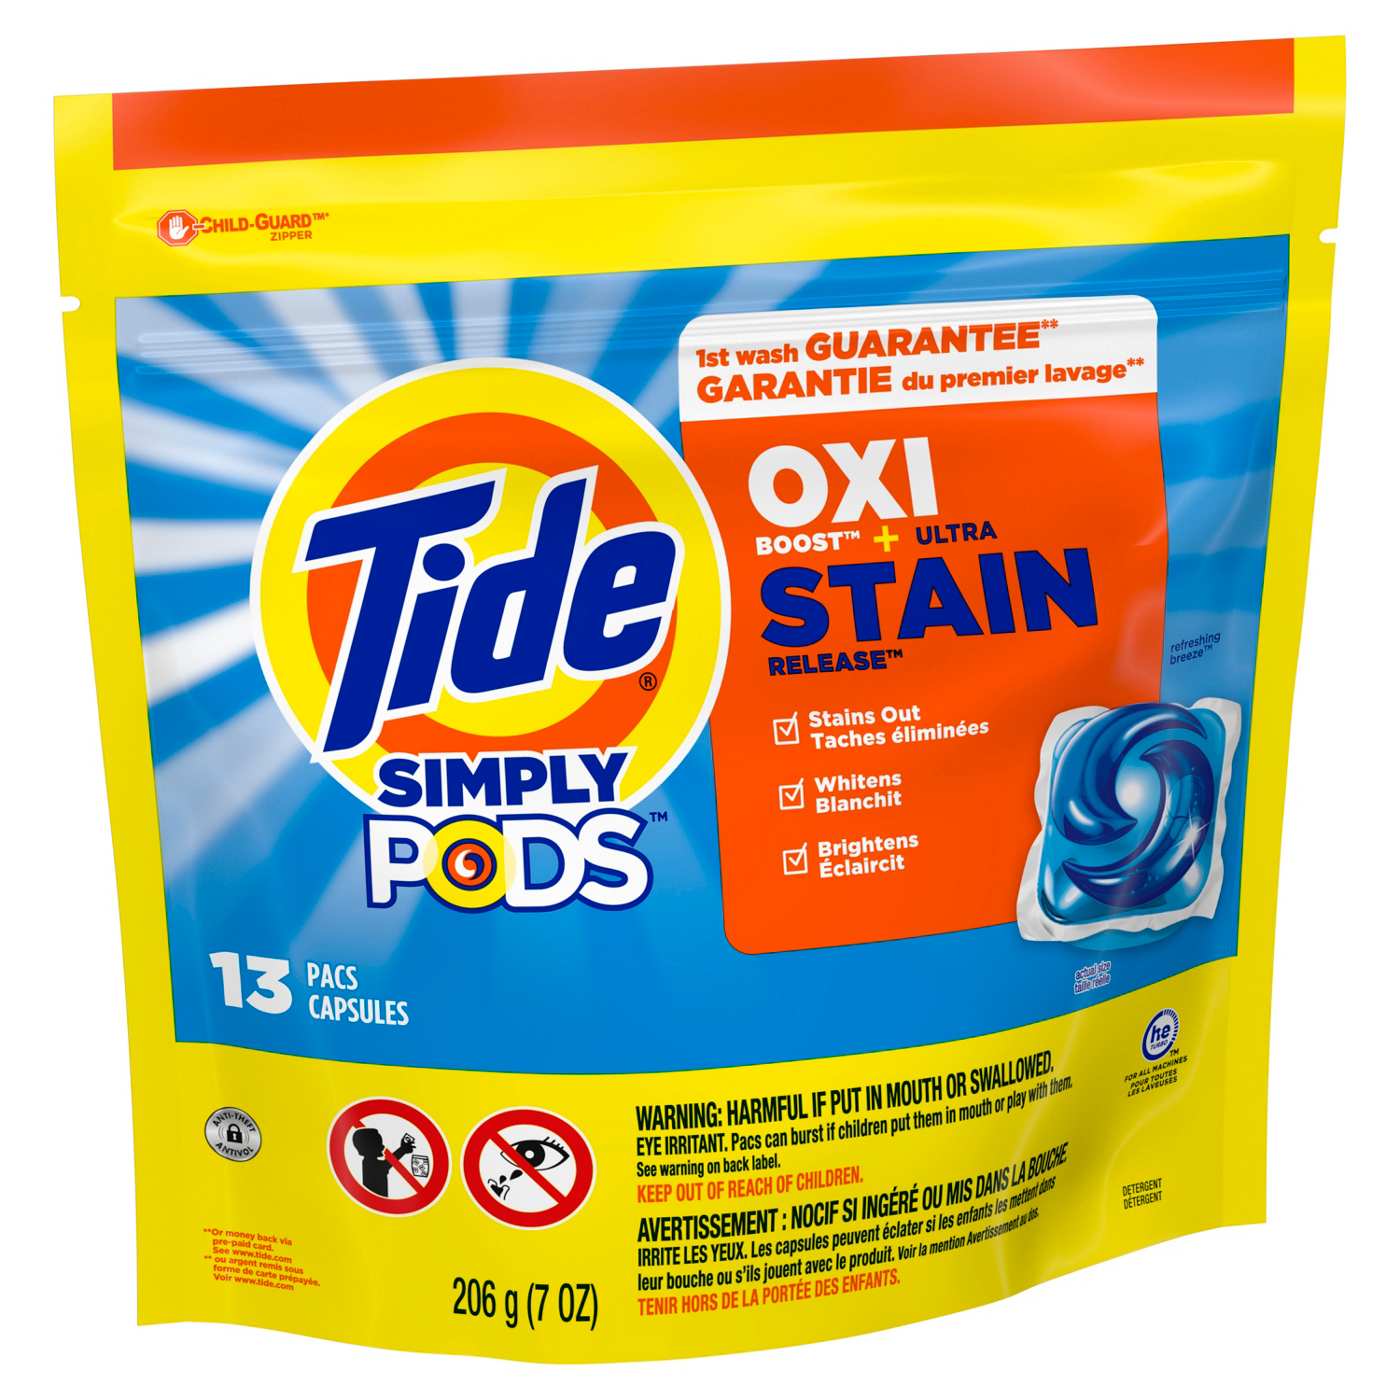 Tide Simply PODS Oxi Boost & Stain Release Laundry Detergent Pacs; image 7 of 10